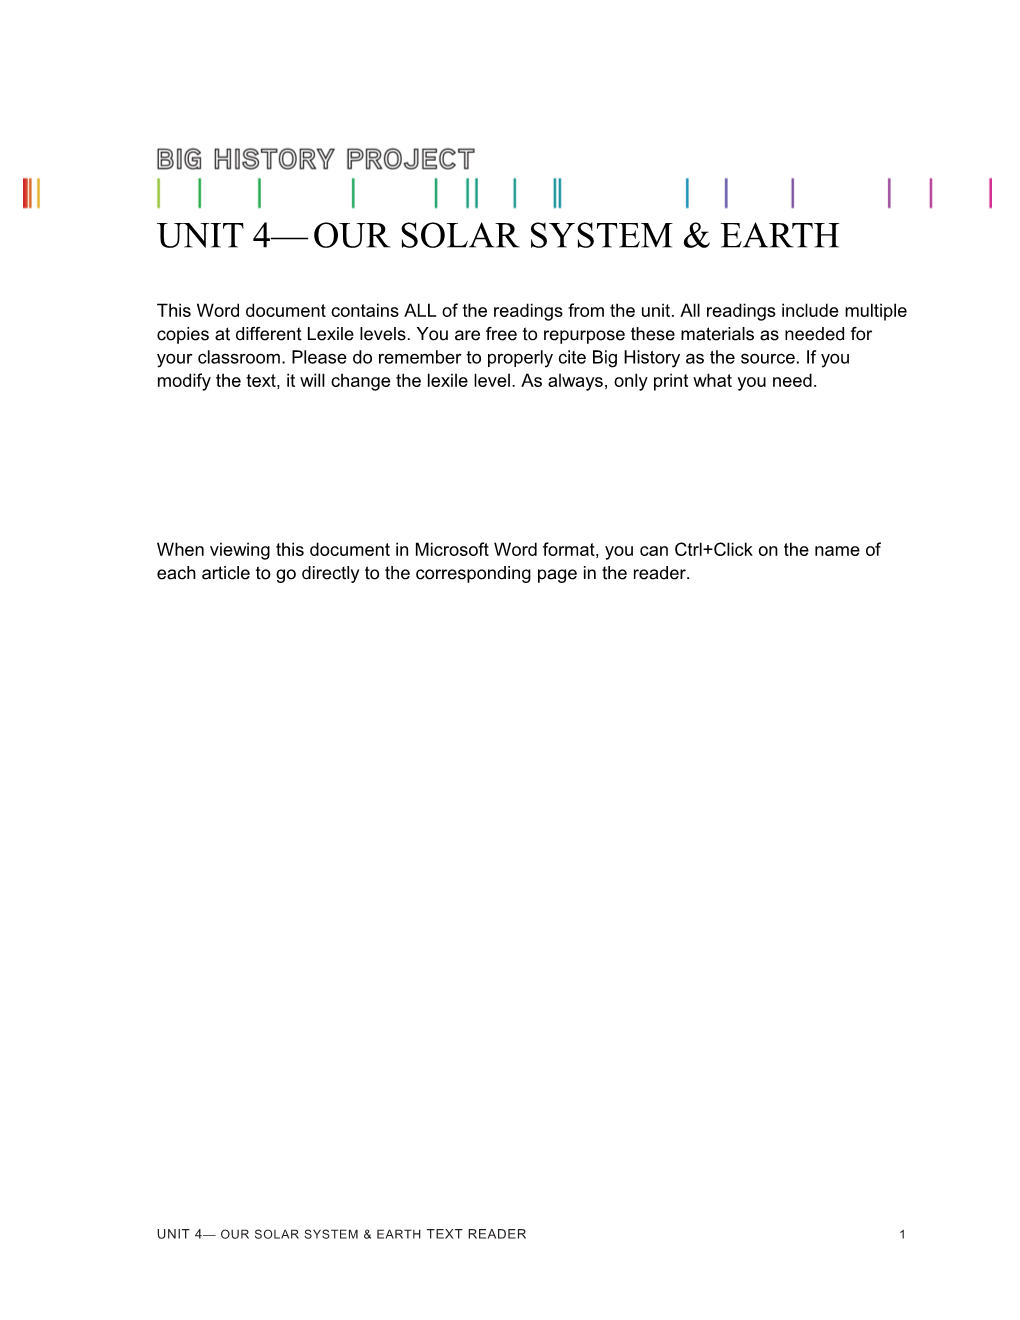 Unit 4 Our Solar System & Earth